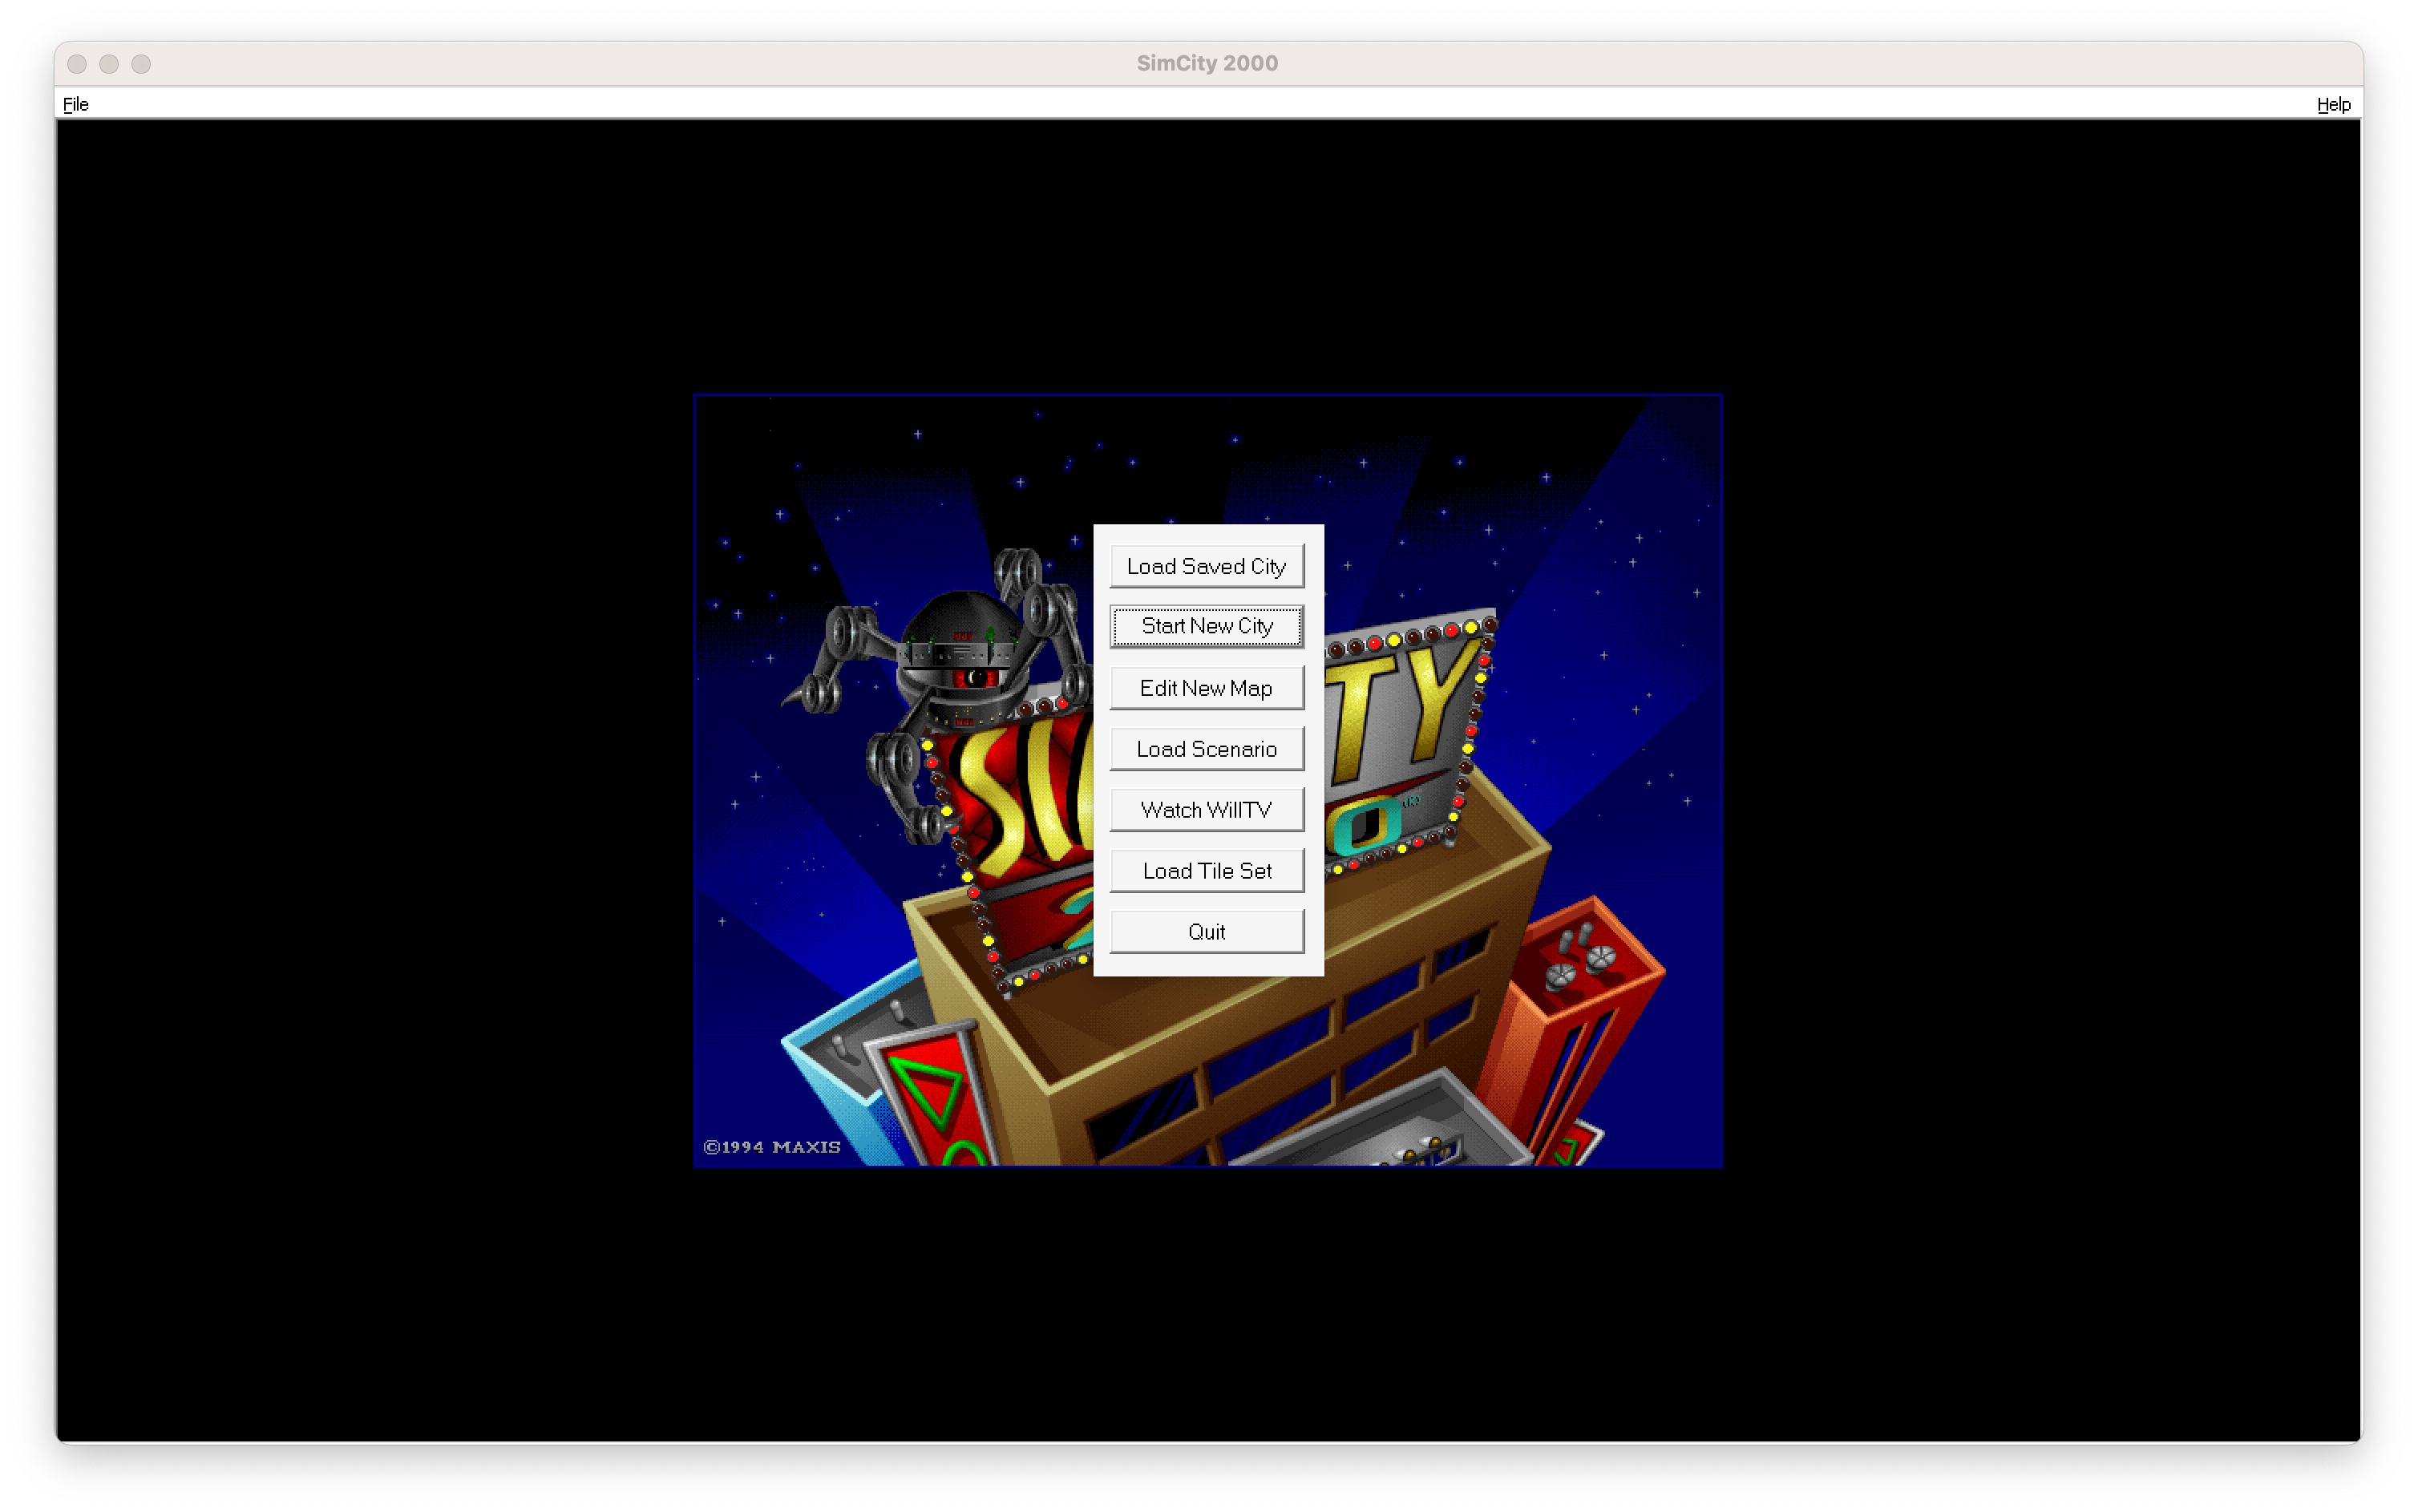 SimCity 2000 home page